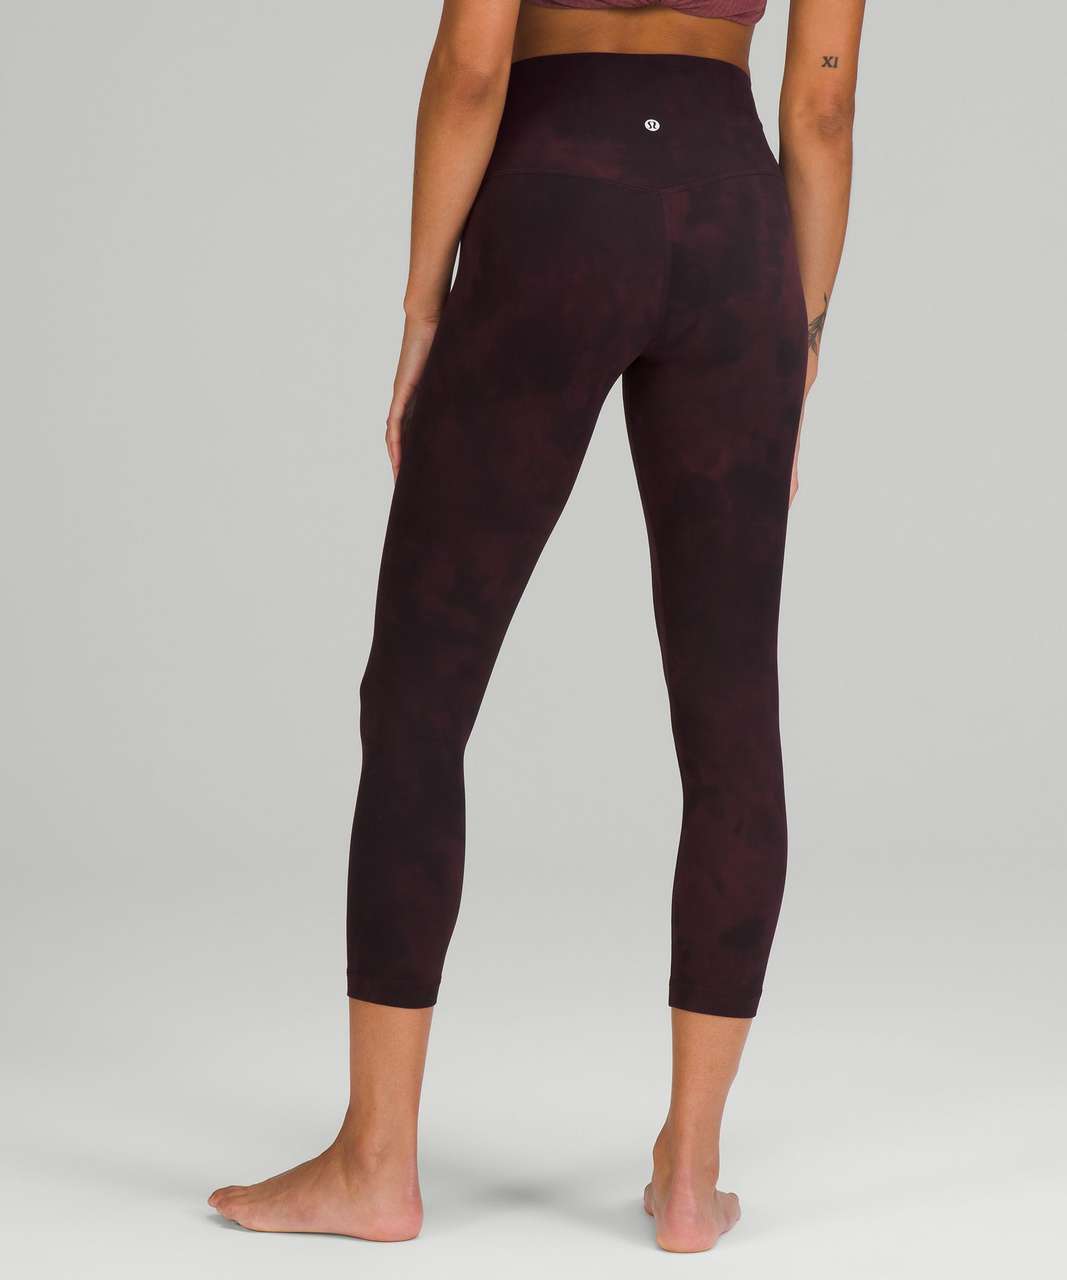 lululemon Align™ High-Rise Crop 23 Deep Luxe. Size 0 . MSRP $98.00 **NWT**